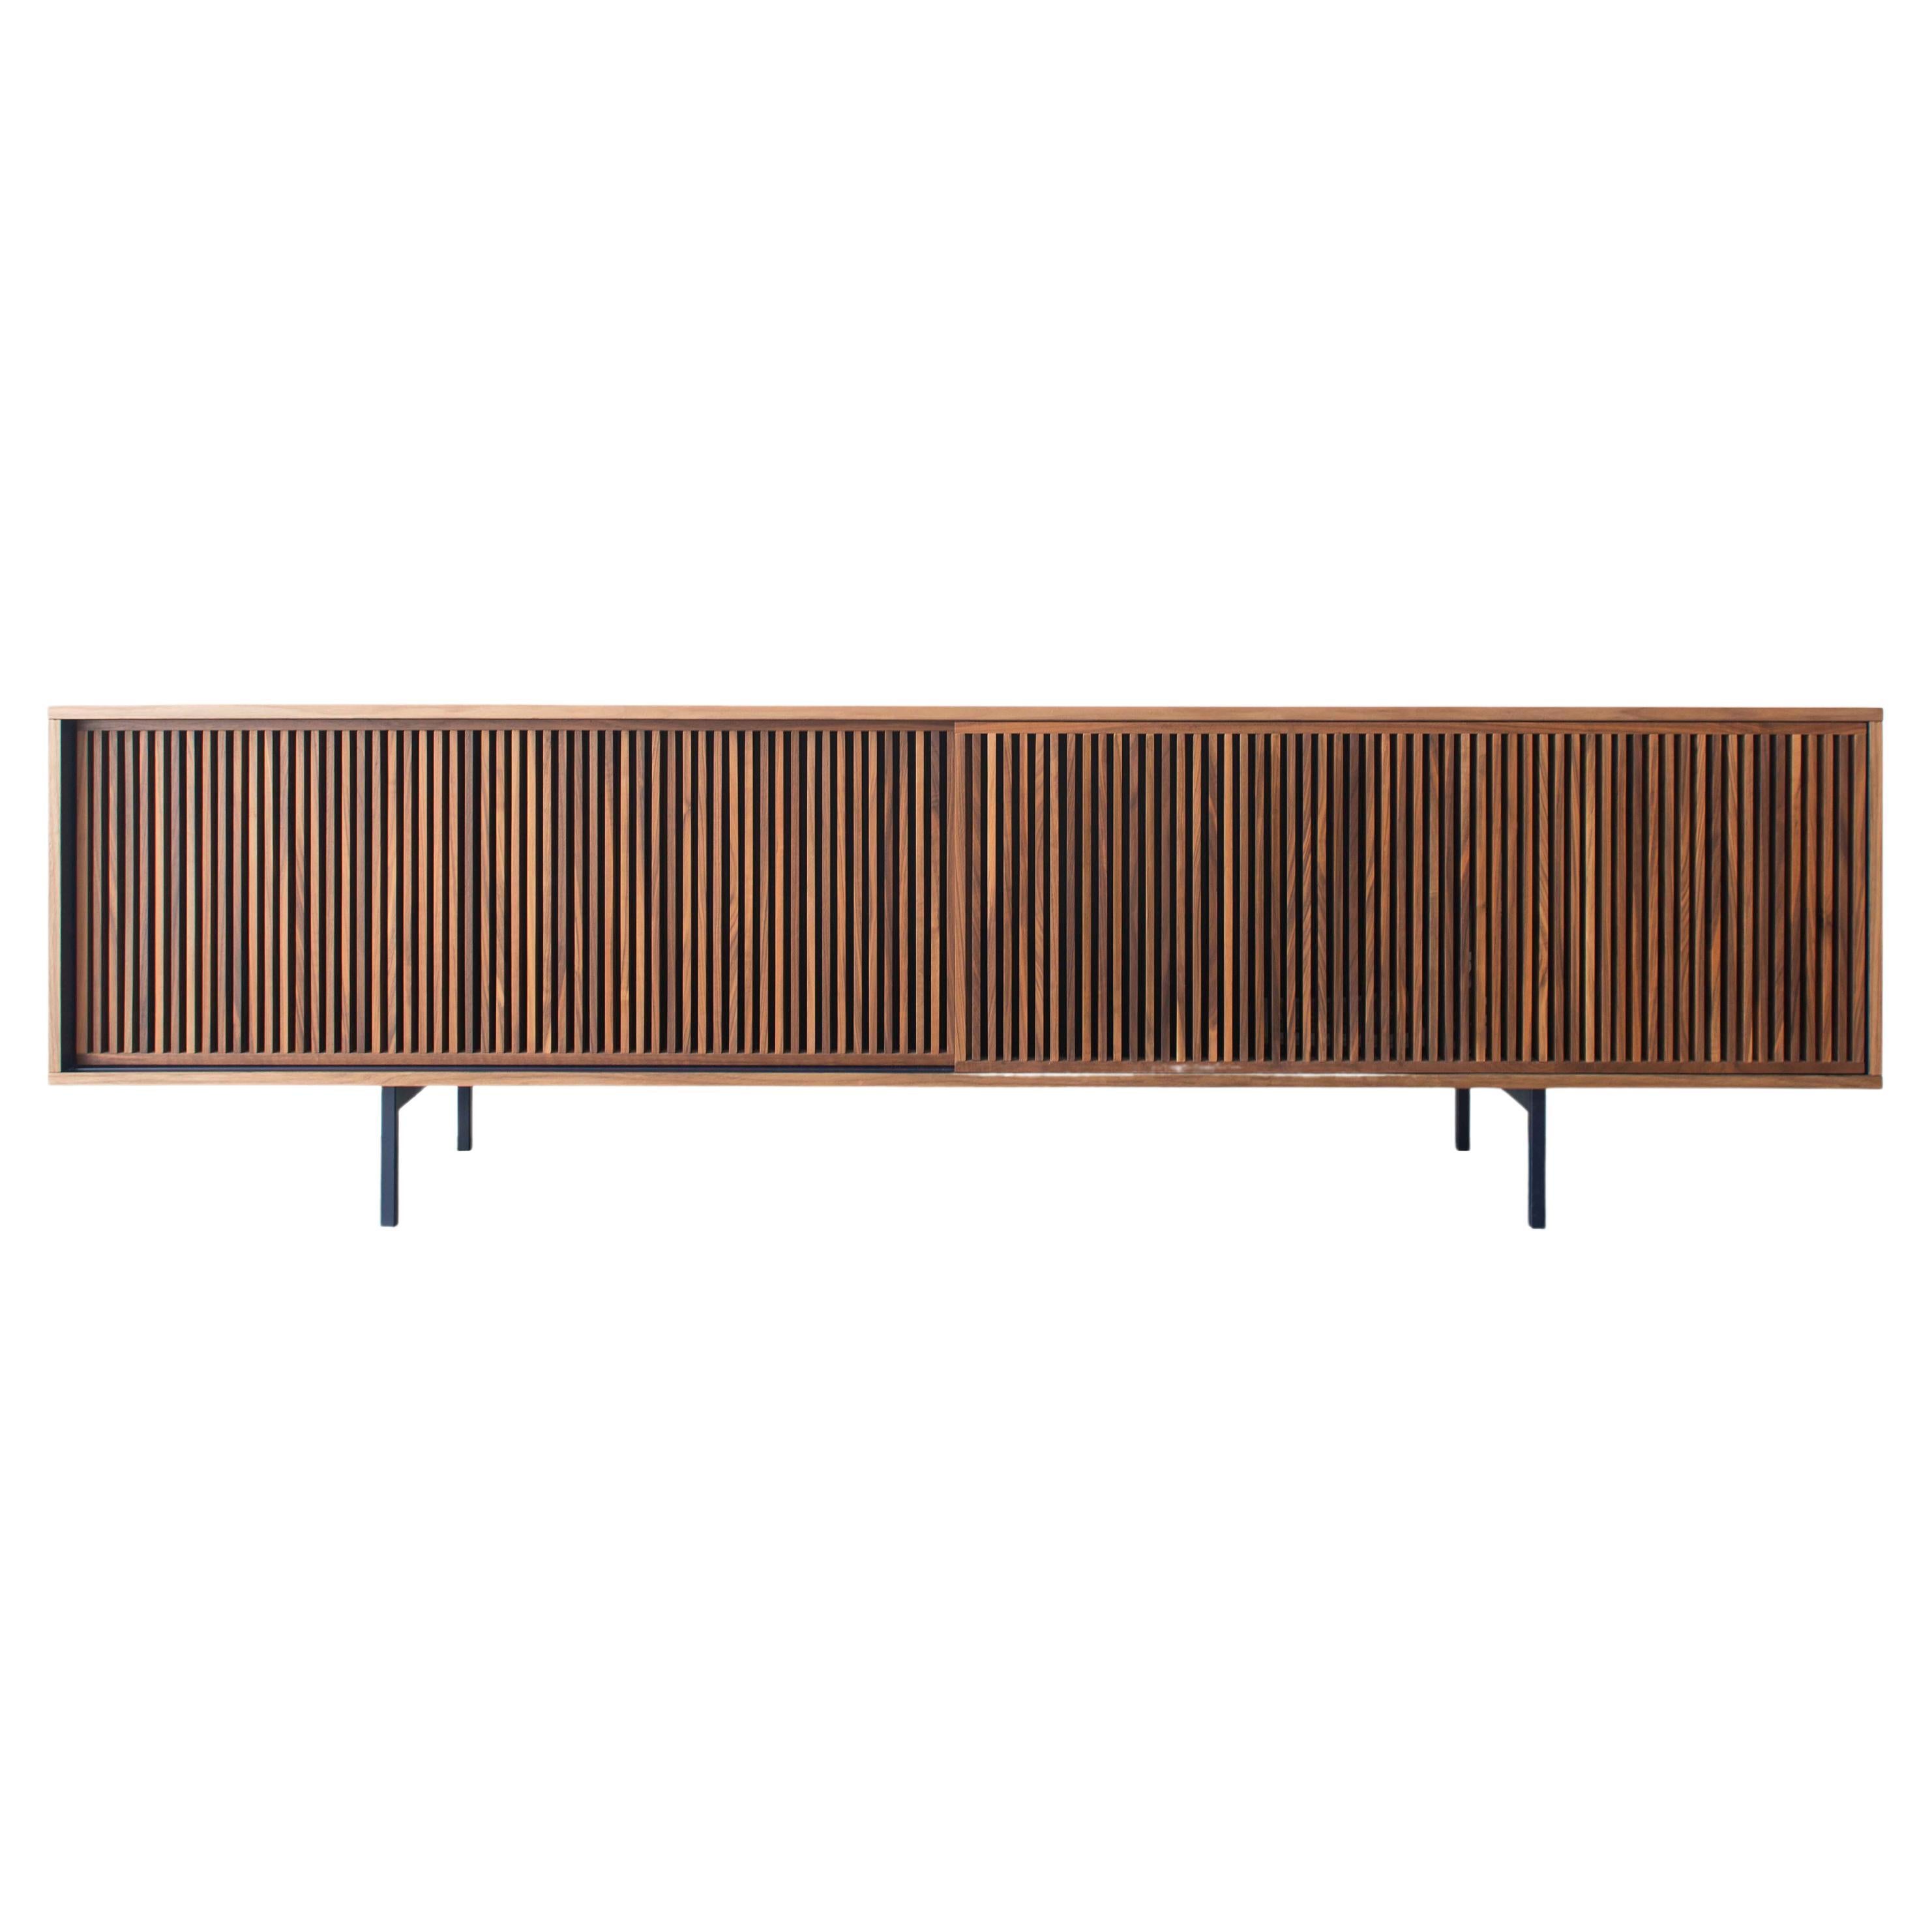 Credenza 2022 - Cupboard 2022 For Sale